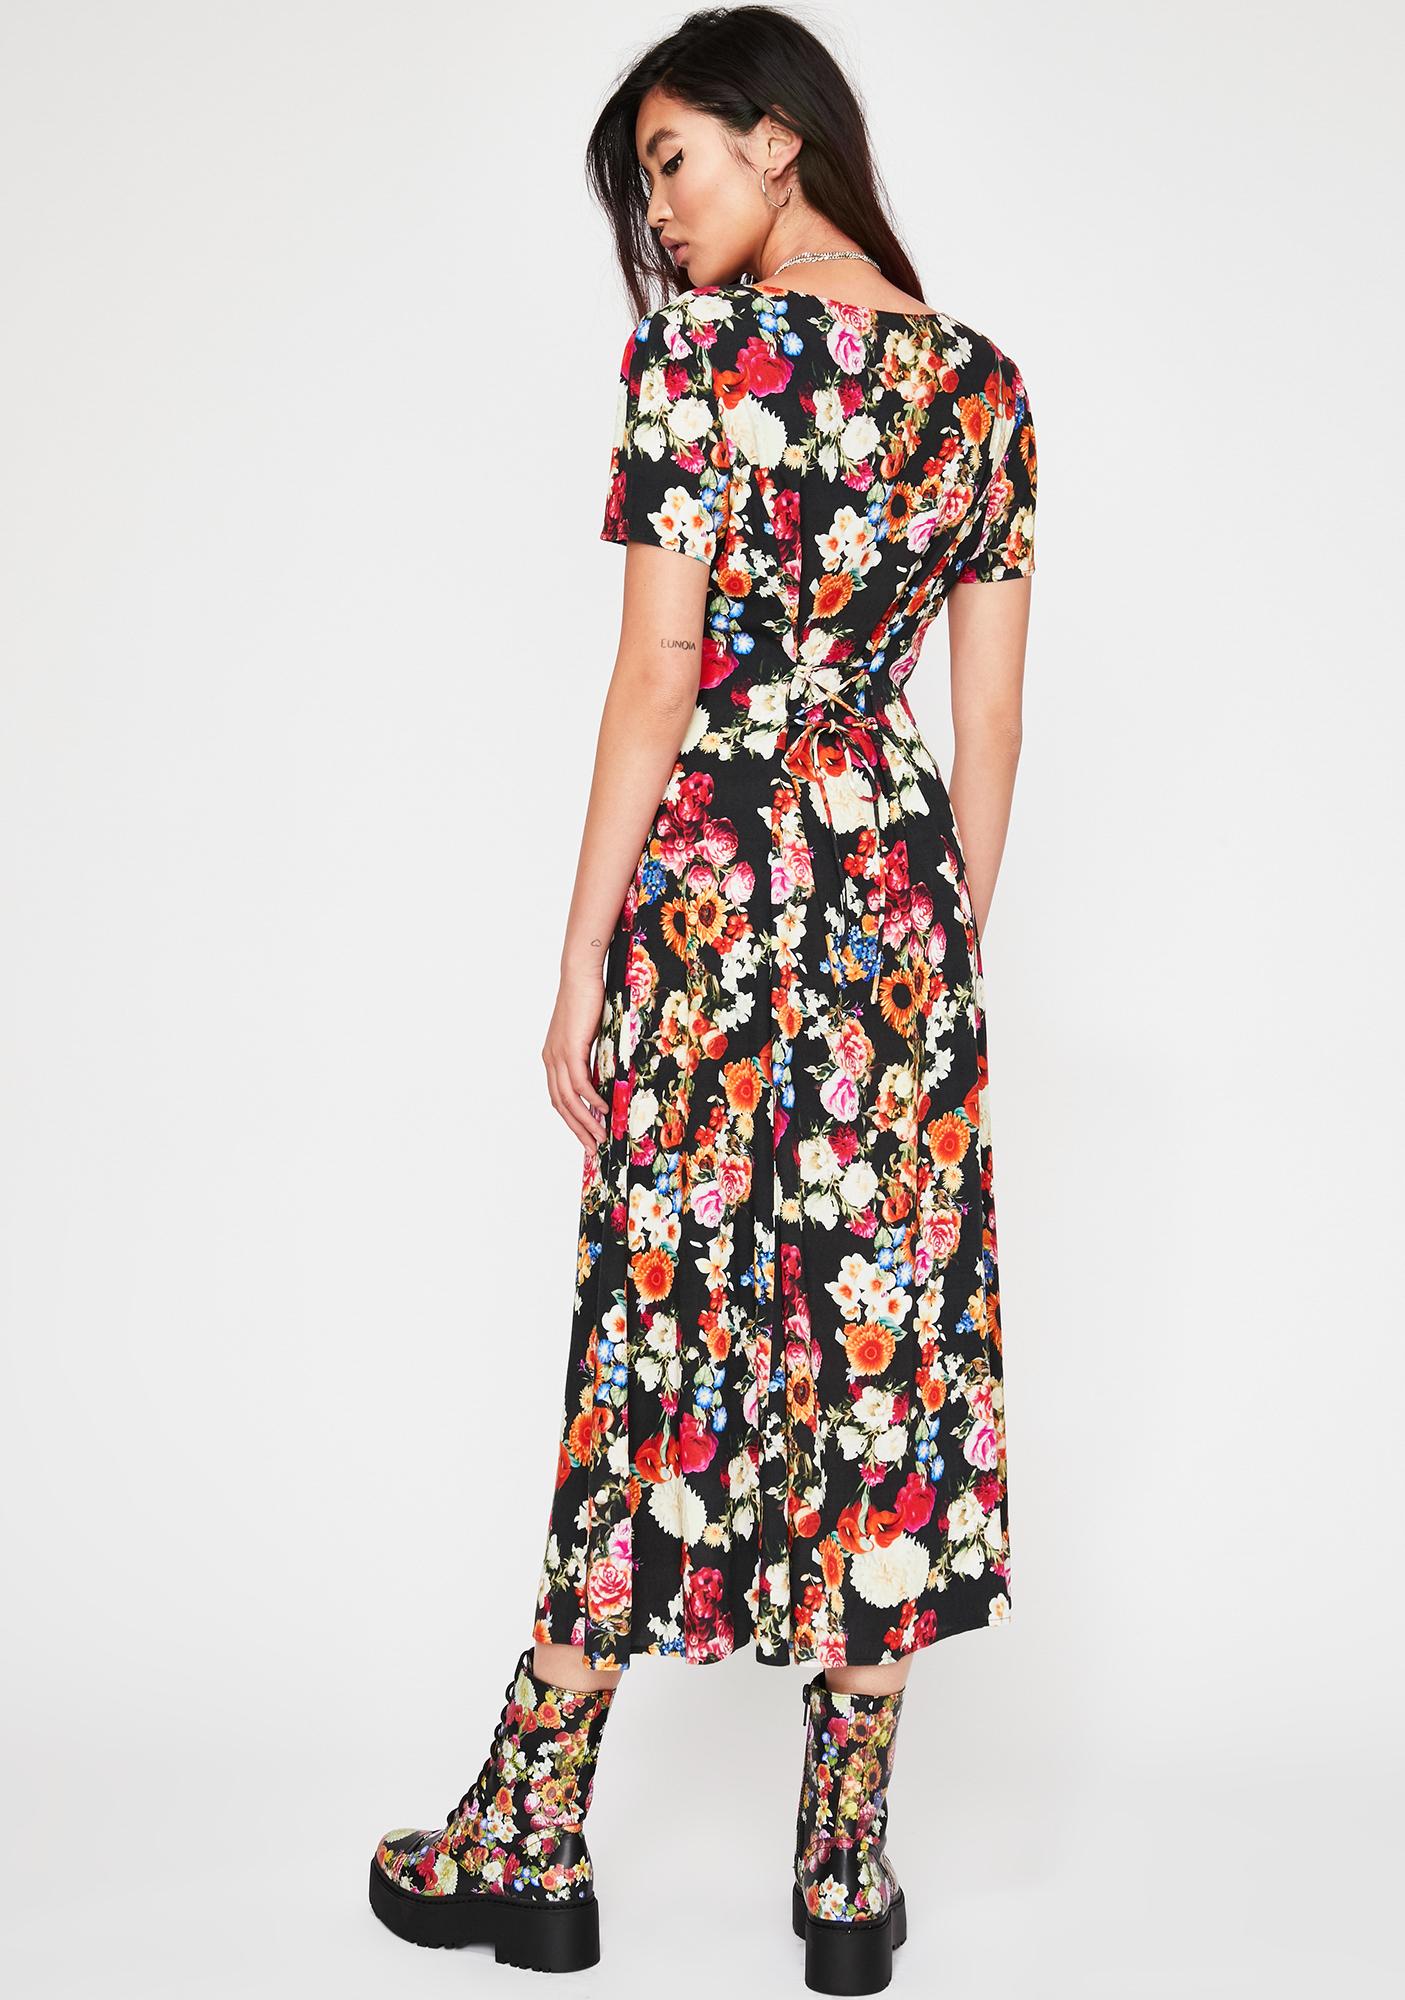 Current Mood Floral Midi Dress Sheer Button Front | Dolls Kill